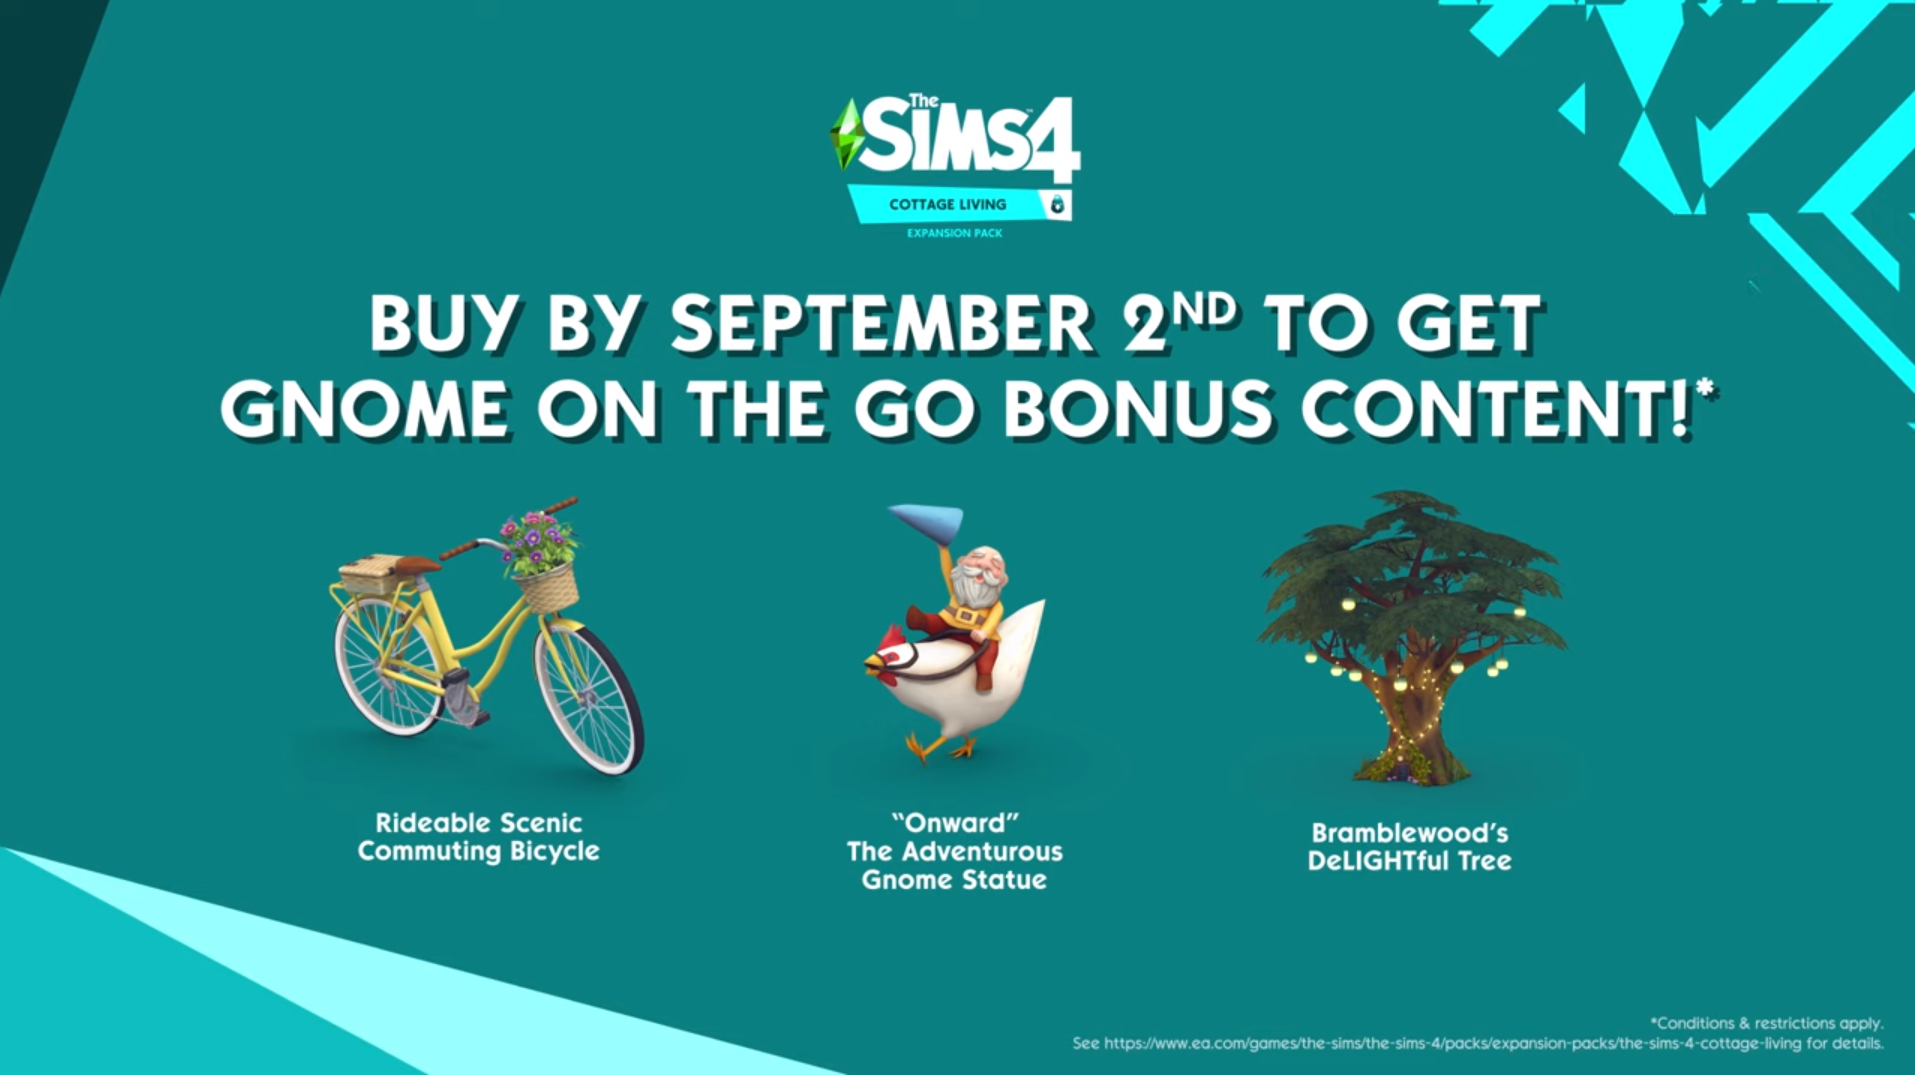 Steam Community :: Guide :: Sims 4 Free & Exclusive Items